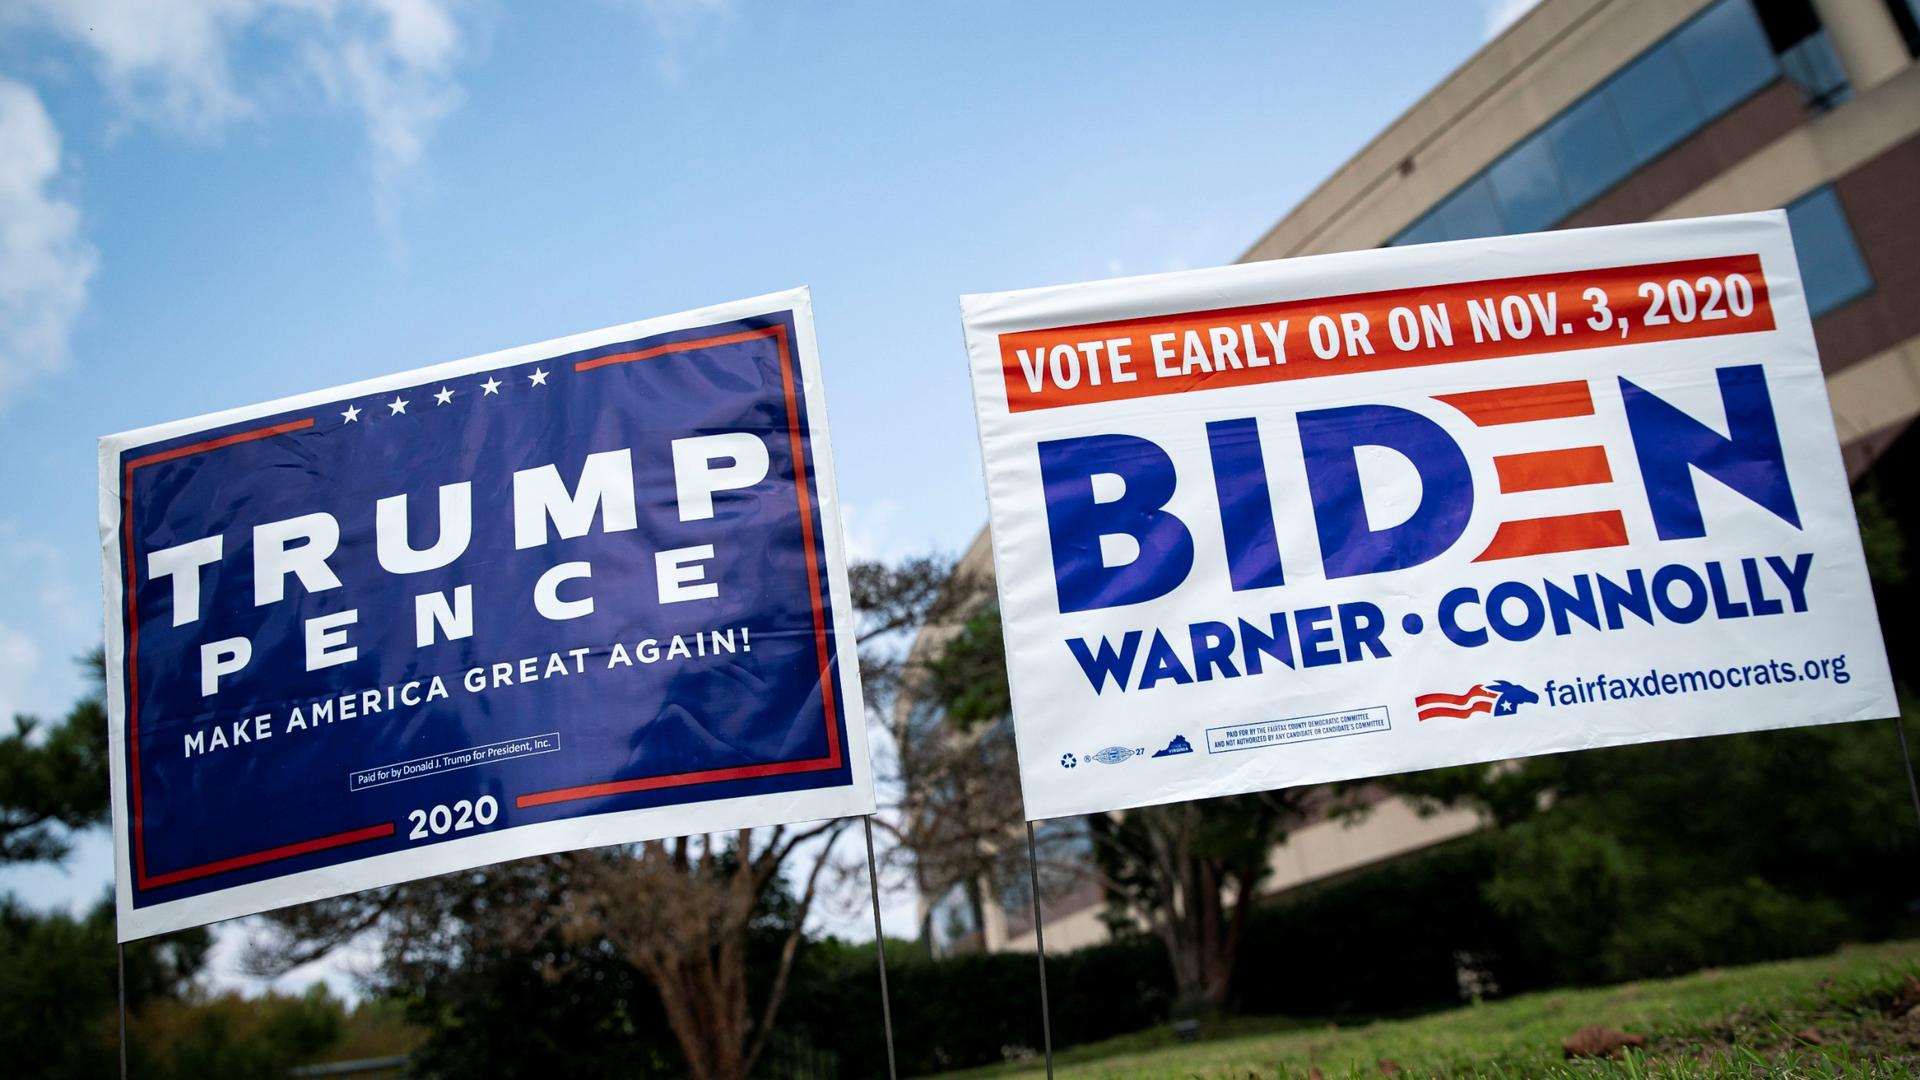 Yard signs supporting US President Donald Trump and Democratic US presidential nominee and former Vice President Joe Biden are seen outside of an early voting site at the Fairfax County Government Center in Fairfax, Virginia, Sept. 18, 2020.